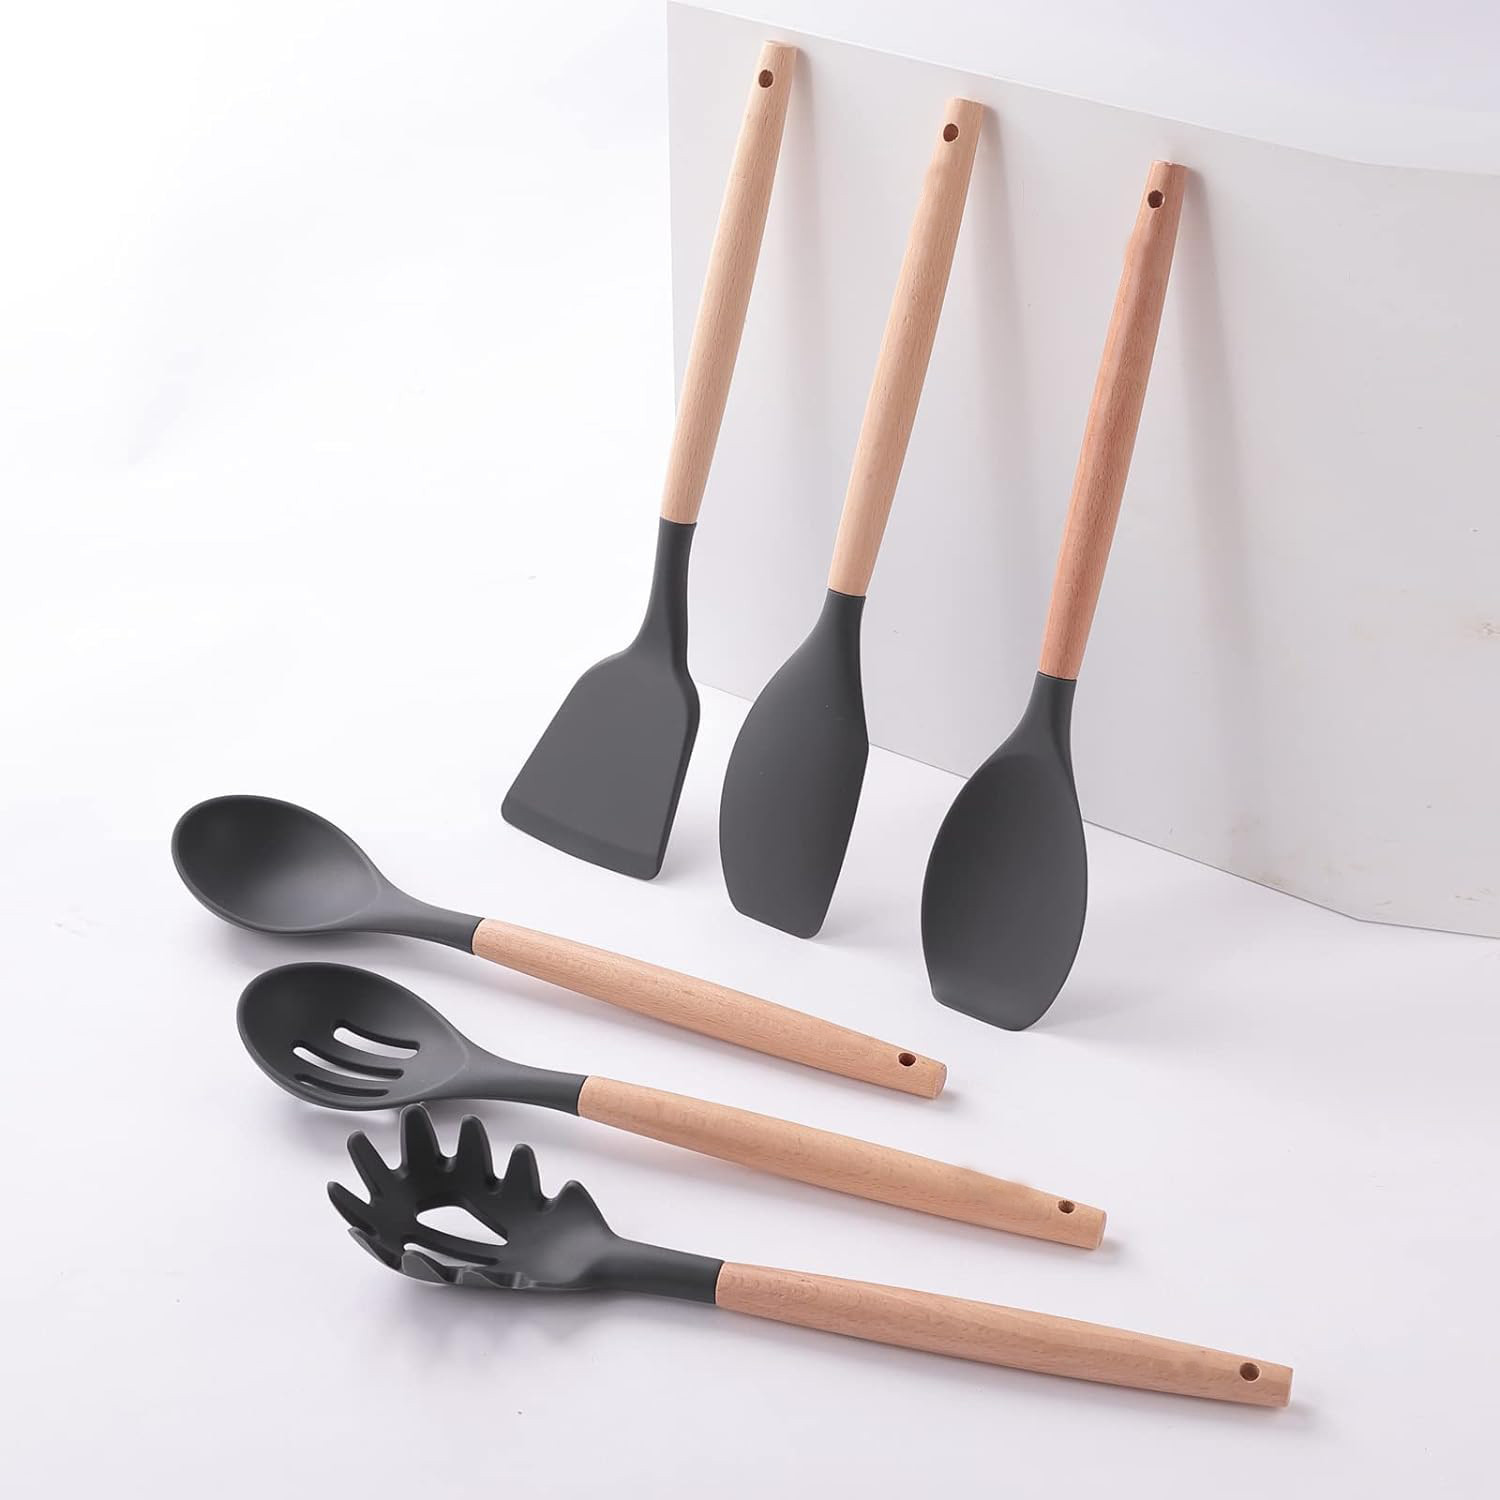 Kuber Industries Silicon Spatula Set | Flexible Kitchen Utensil Set | Spatula for Cooking | Non-Stick Spatula | Heat Resistant Spatula With Wooden Handle | DSSH001-1 | Set of 12 | Gray